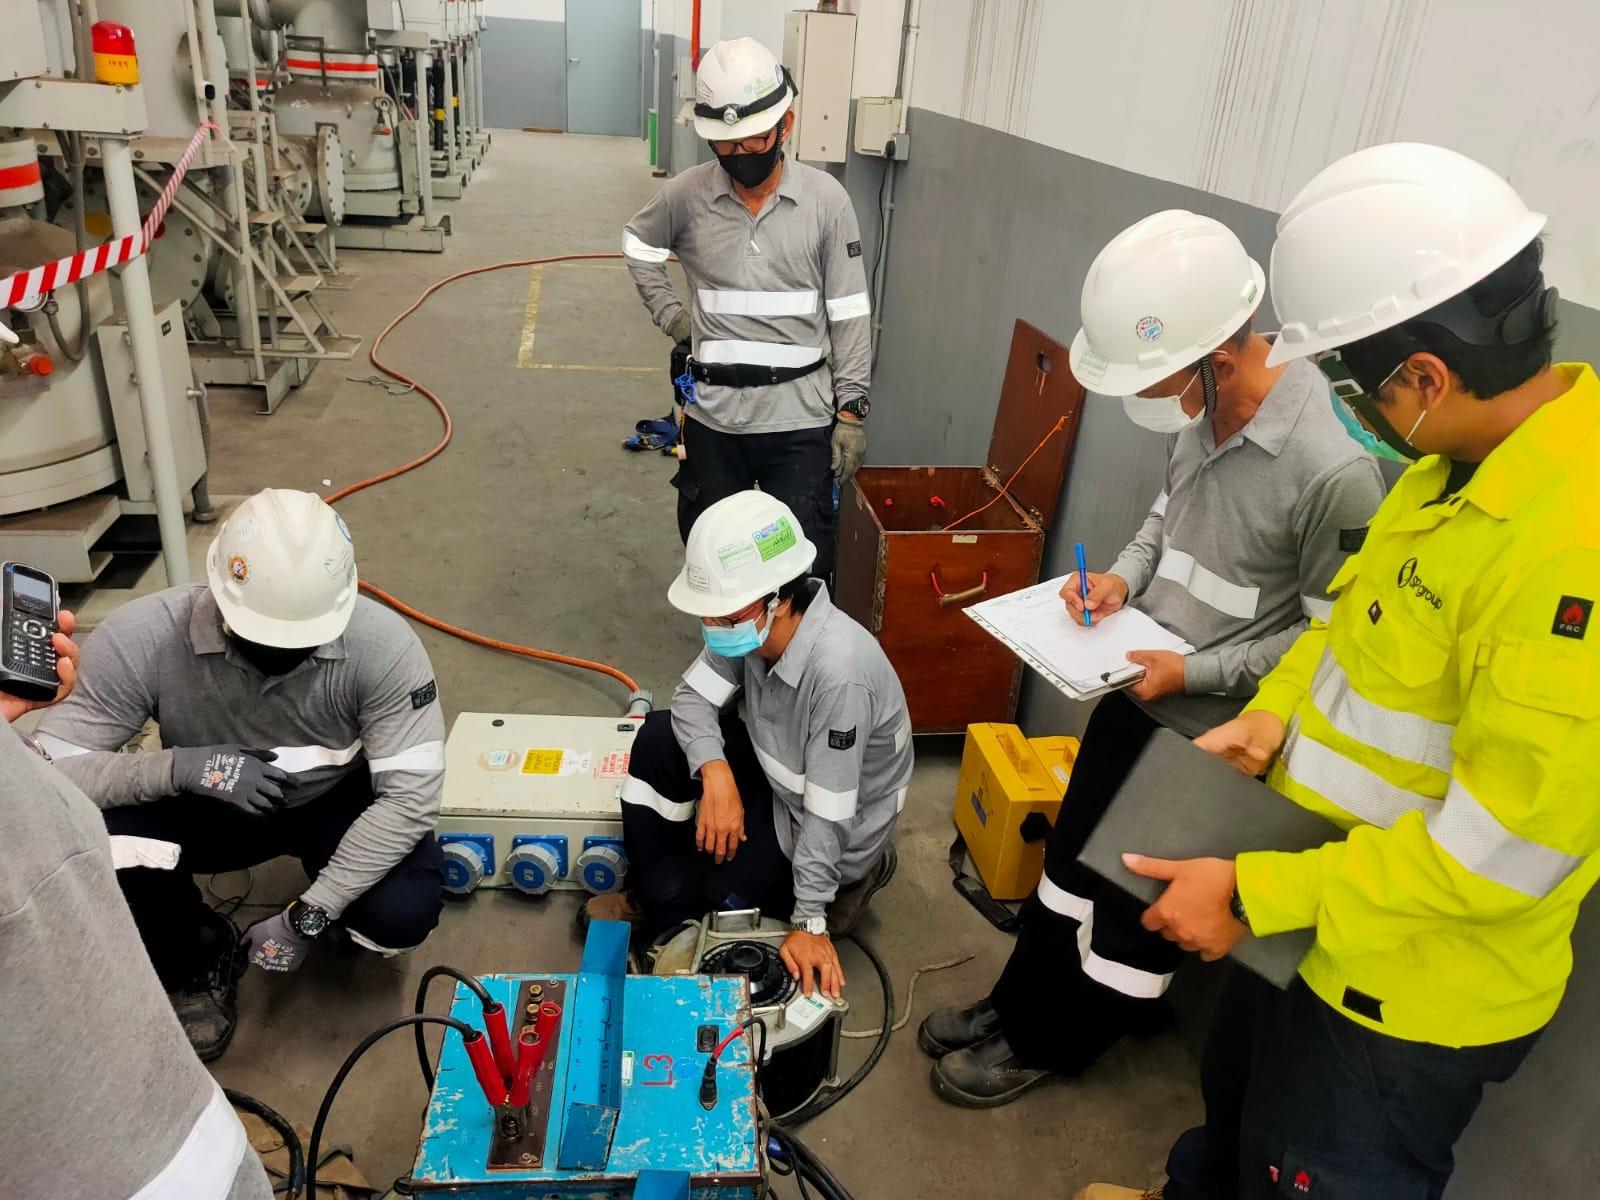 Faisal (in yellow) witnessing a pre-commissioning test conducted by the Professional Engineer and his testing team at the end of the cable installation project. This test is integral in ensuring the health of new or diverted cables before they are connected to the national power grid.